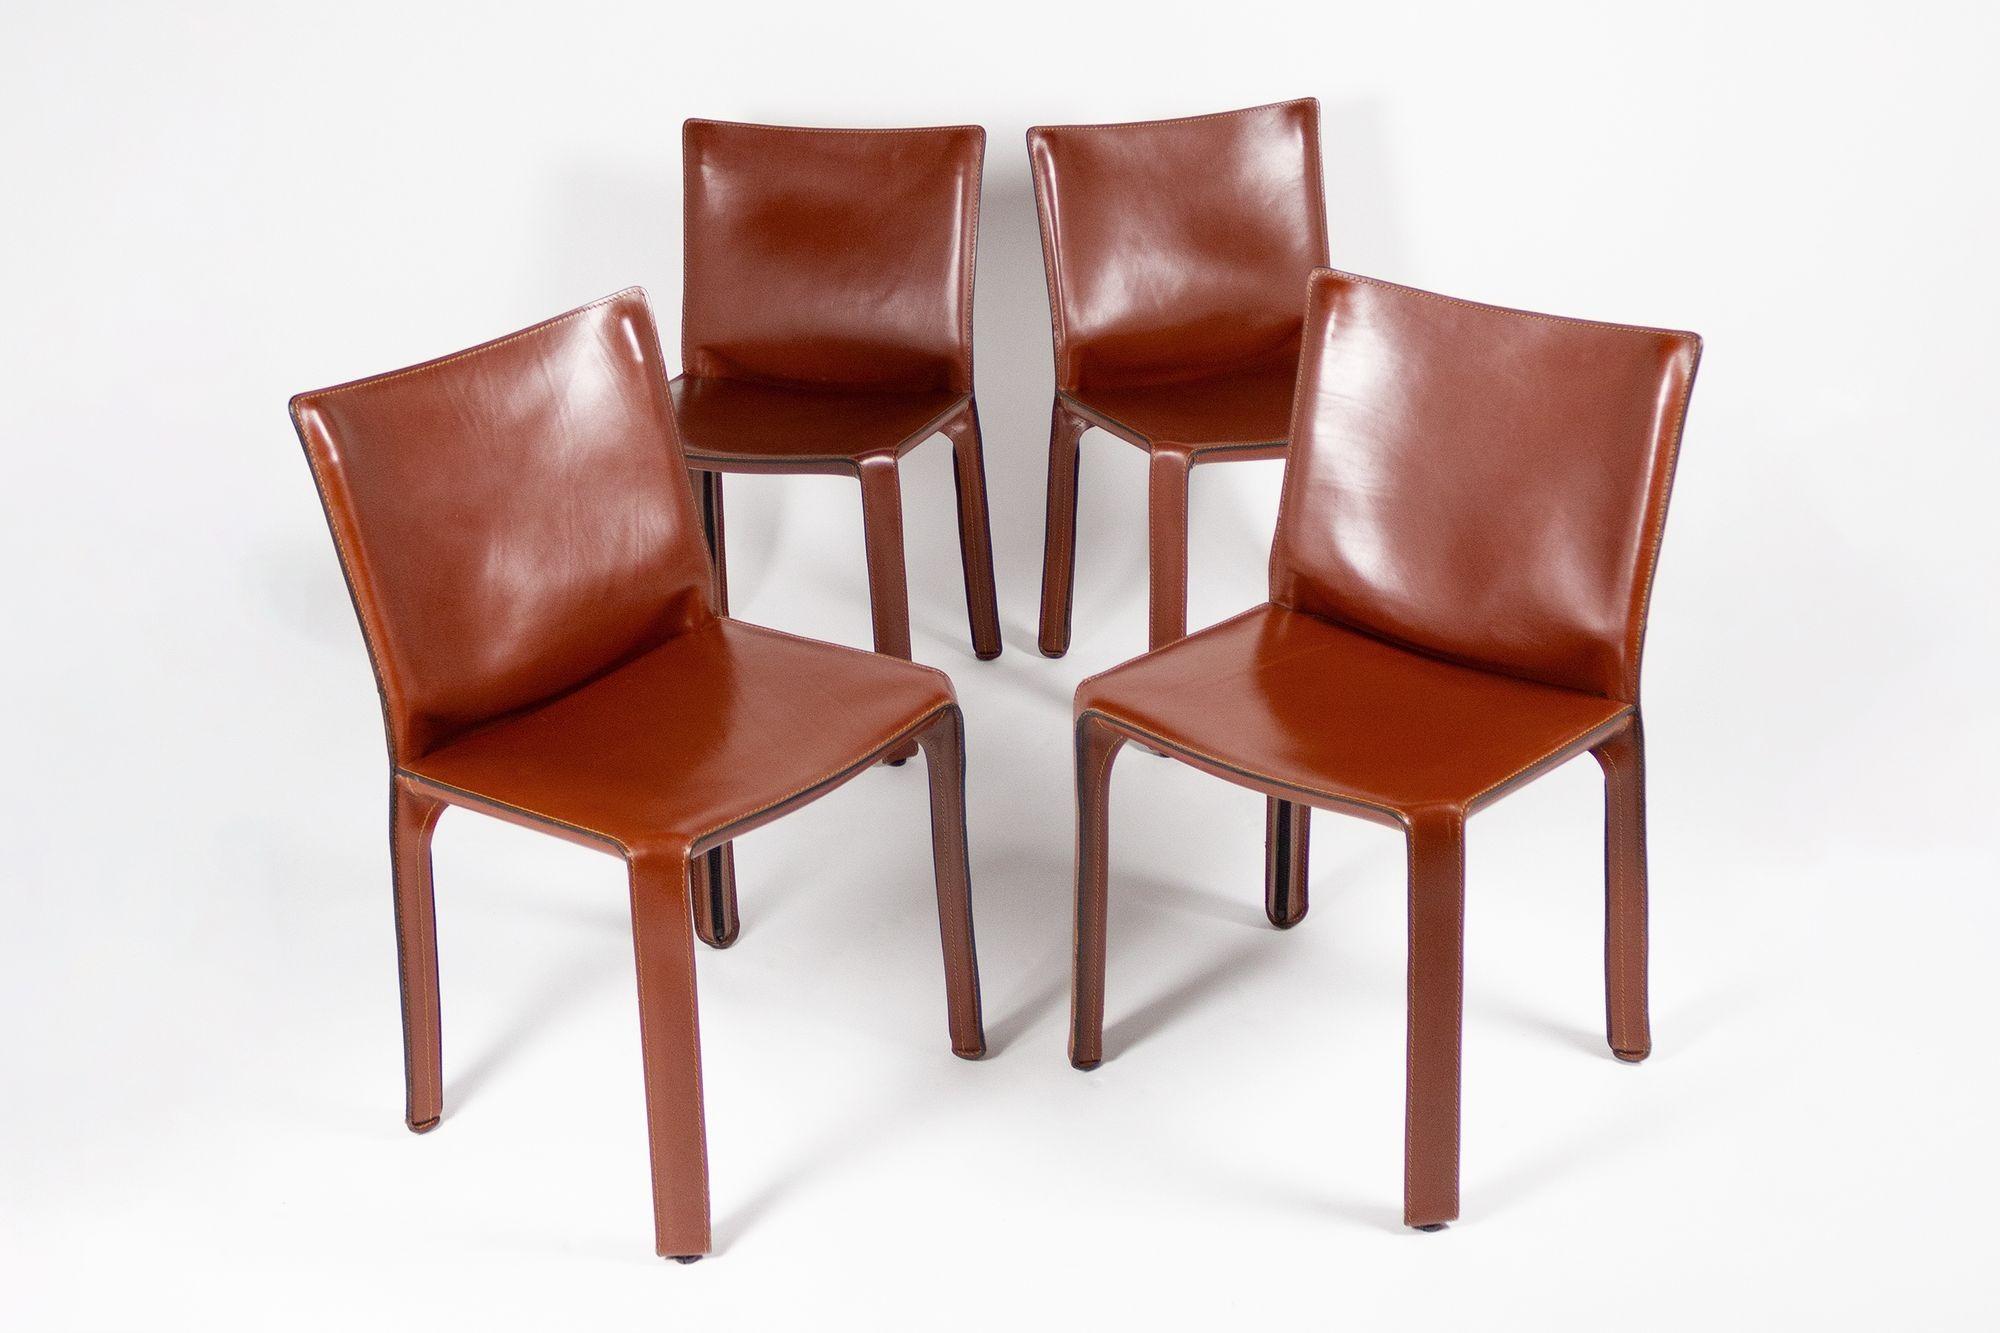 Classic Cab chairs model 412 designed by Mario Bellini for Cassina. Chairs are in very good condition with the original saddle leather upholstery.